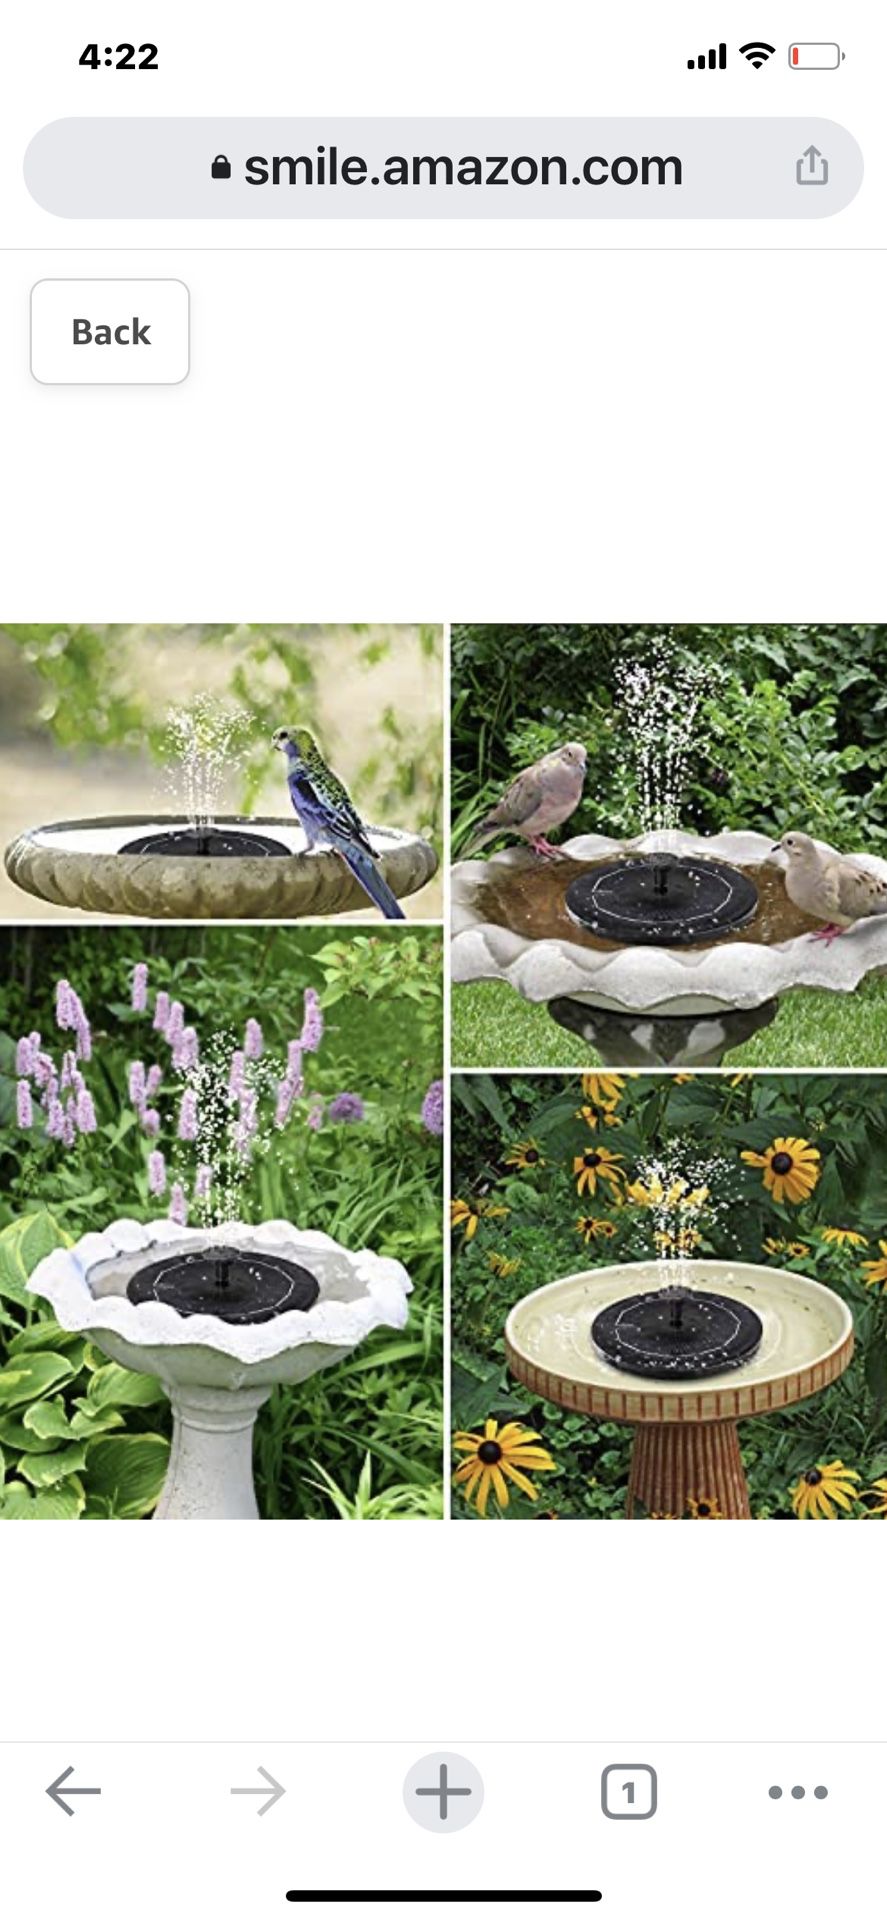 Solar  Fountain Pump for Bird Bath，Upgrade 2.5W Solar Panel Kit Water Pump,Free Standing Floating Solar Powered Water Fountain for Bird Bath,Garden, P